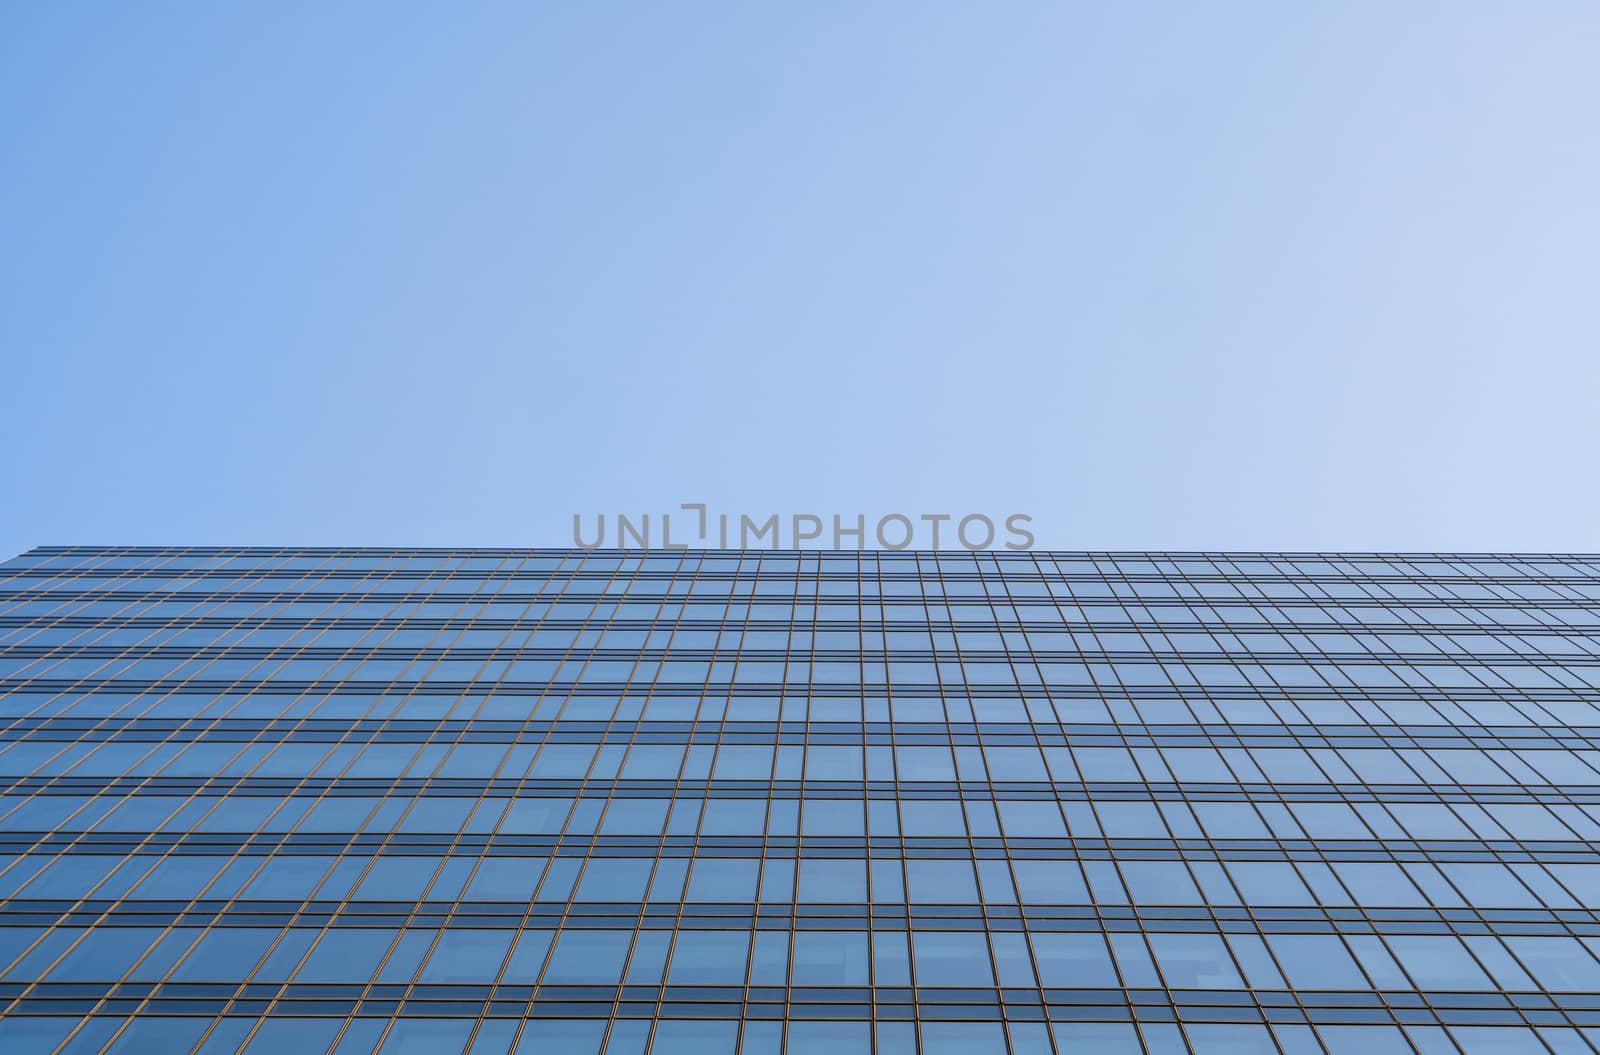 Reflection of the sky in the windows of a building. Perspective and underdite angle view to modern glass building skyscrapers over blue sky. Windows of Bussiness office or corporate building. by vovsht